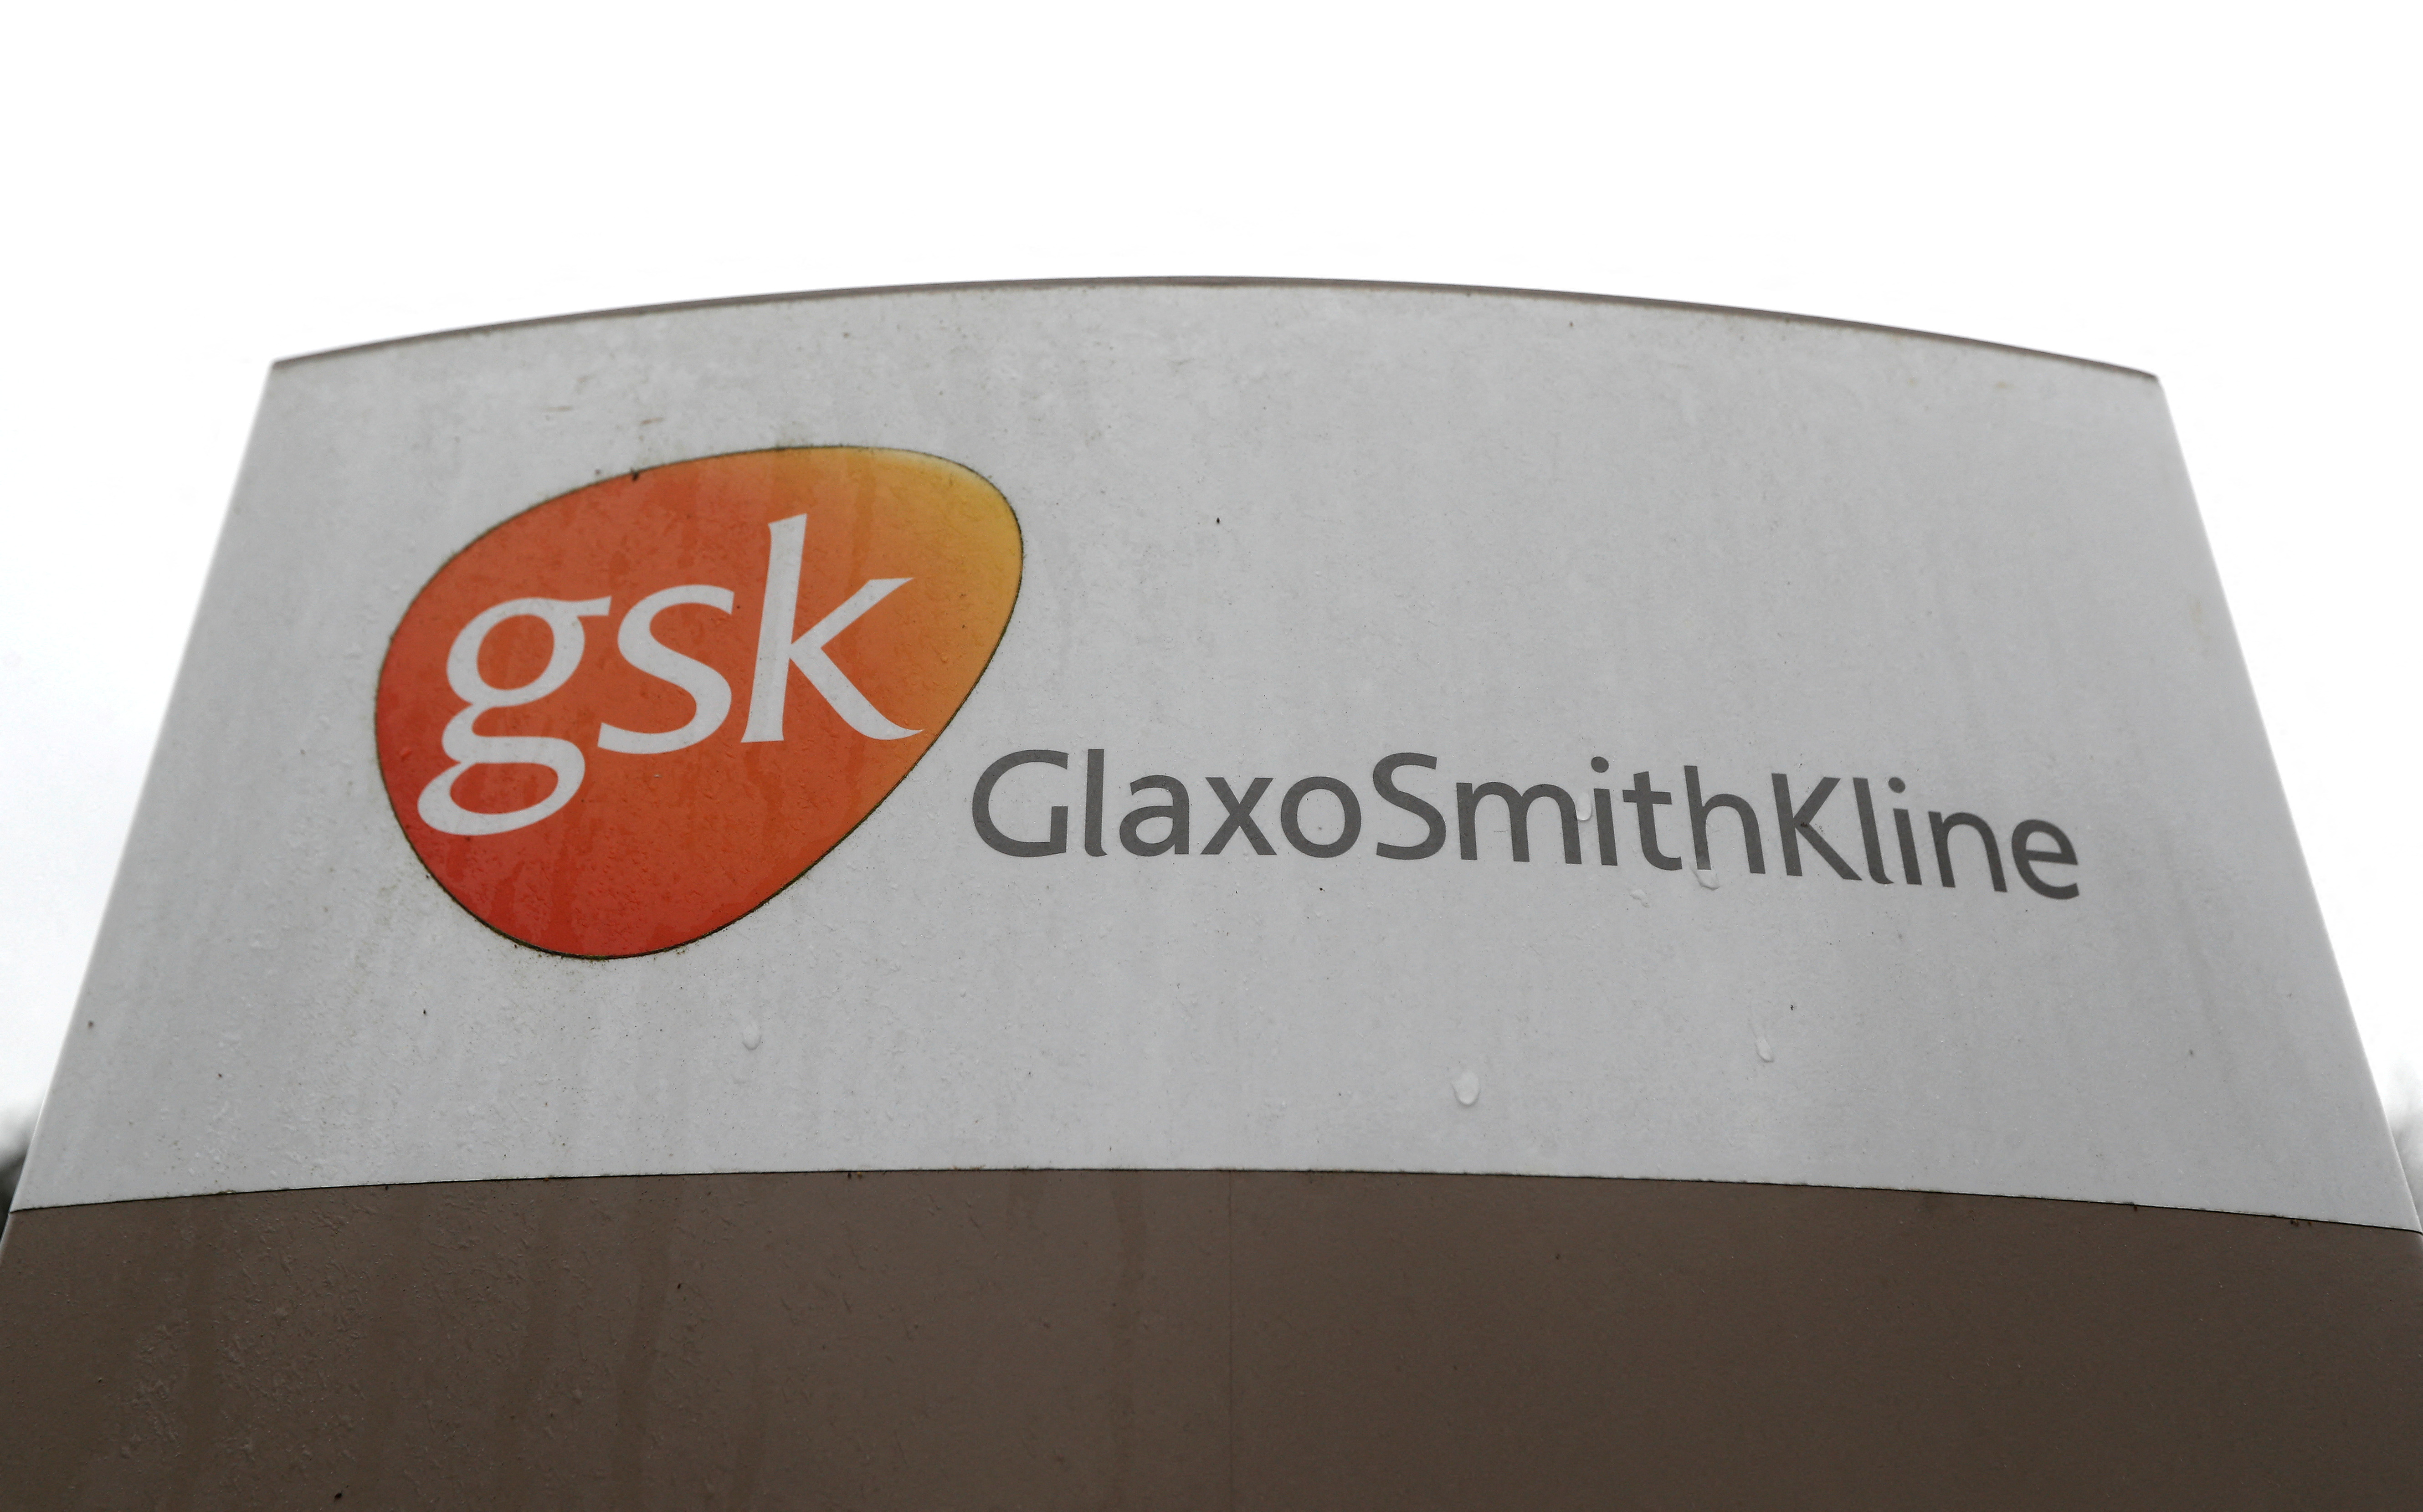 A GlaxoSmithKline (GSK) logo is seen at the GSK research centre in Stevenage, Britain November 26, 2019. REUTERS/Peter Nicholls